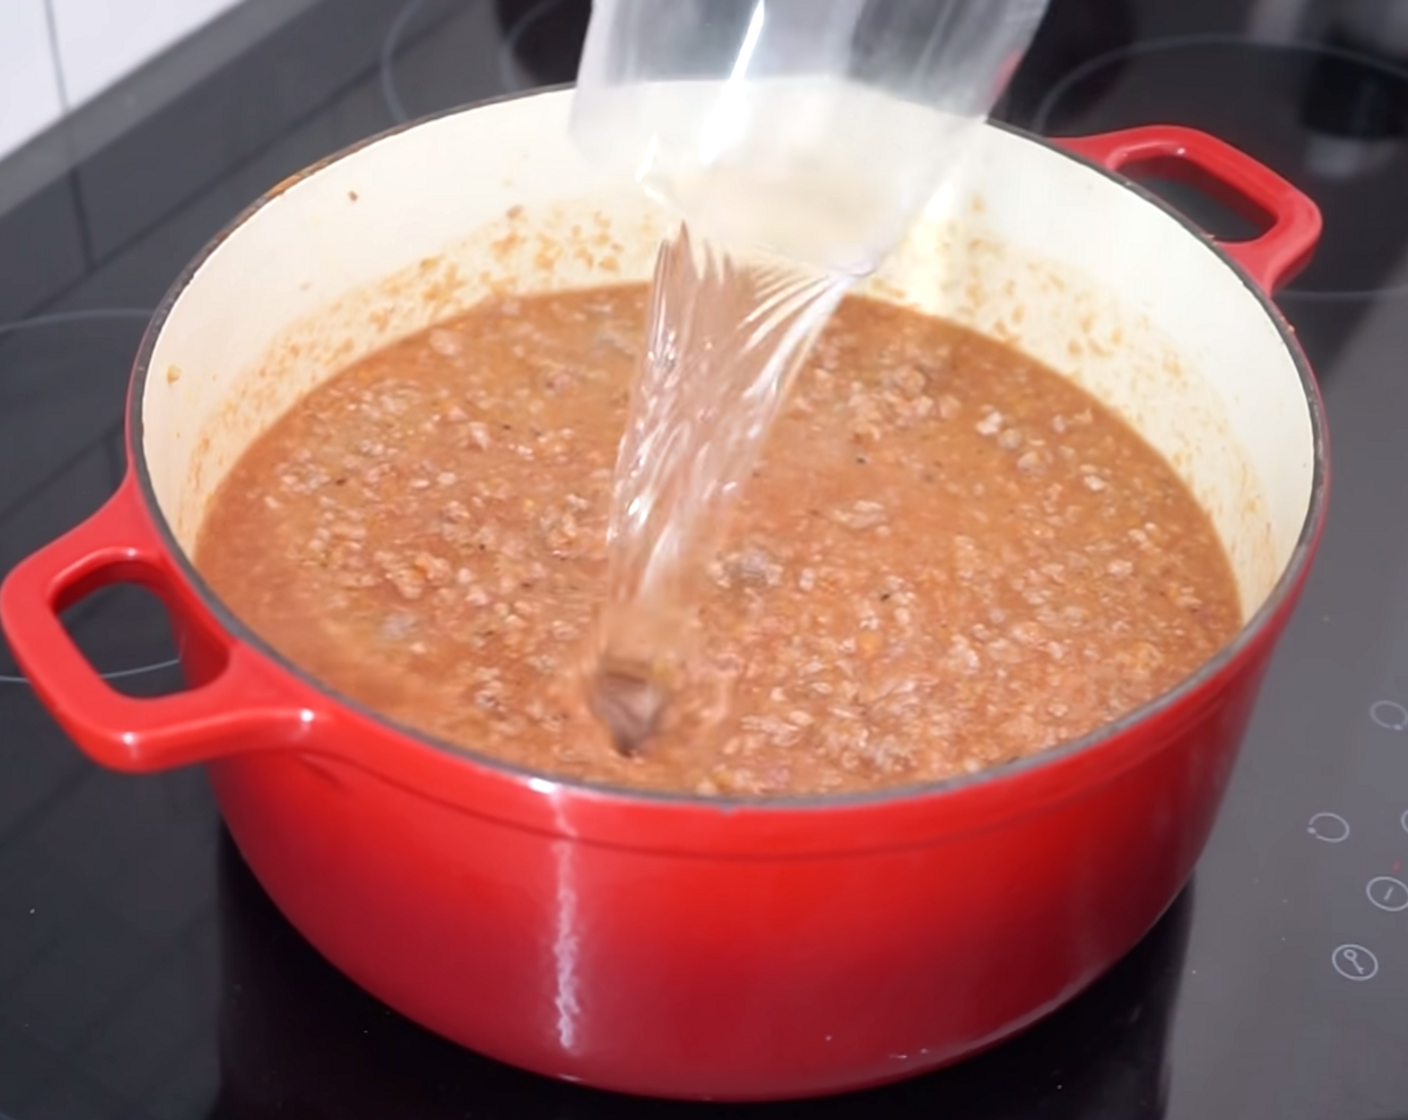 step 9 The final ingredient is 1 glass of water. Add the Water (8 oz) to your Bolognese sauce, mix through and cover, leaving it to cook for 30 minutes. Stir the sauce every 10 minutes so the meat cooks evenly and nothing sticks to the pan.